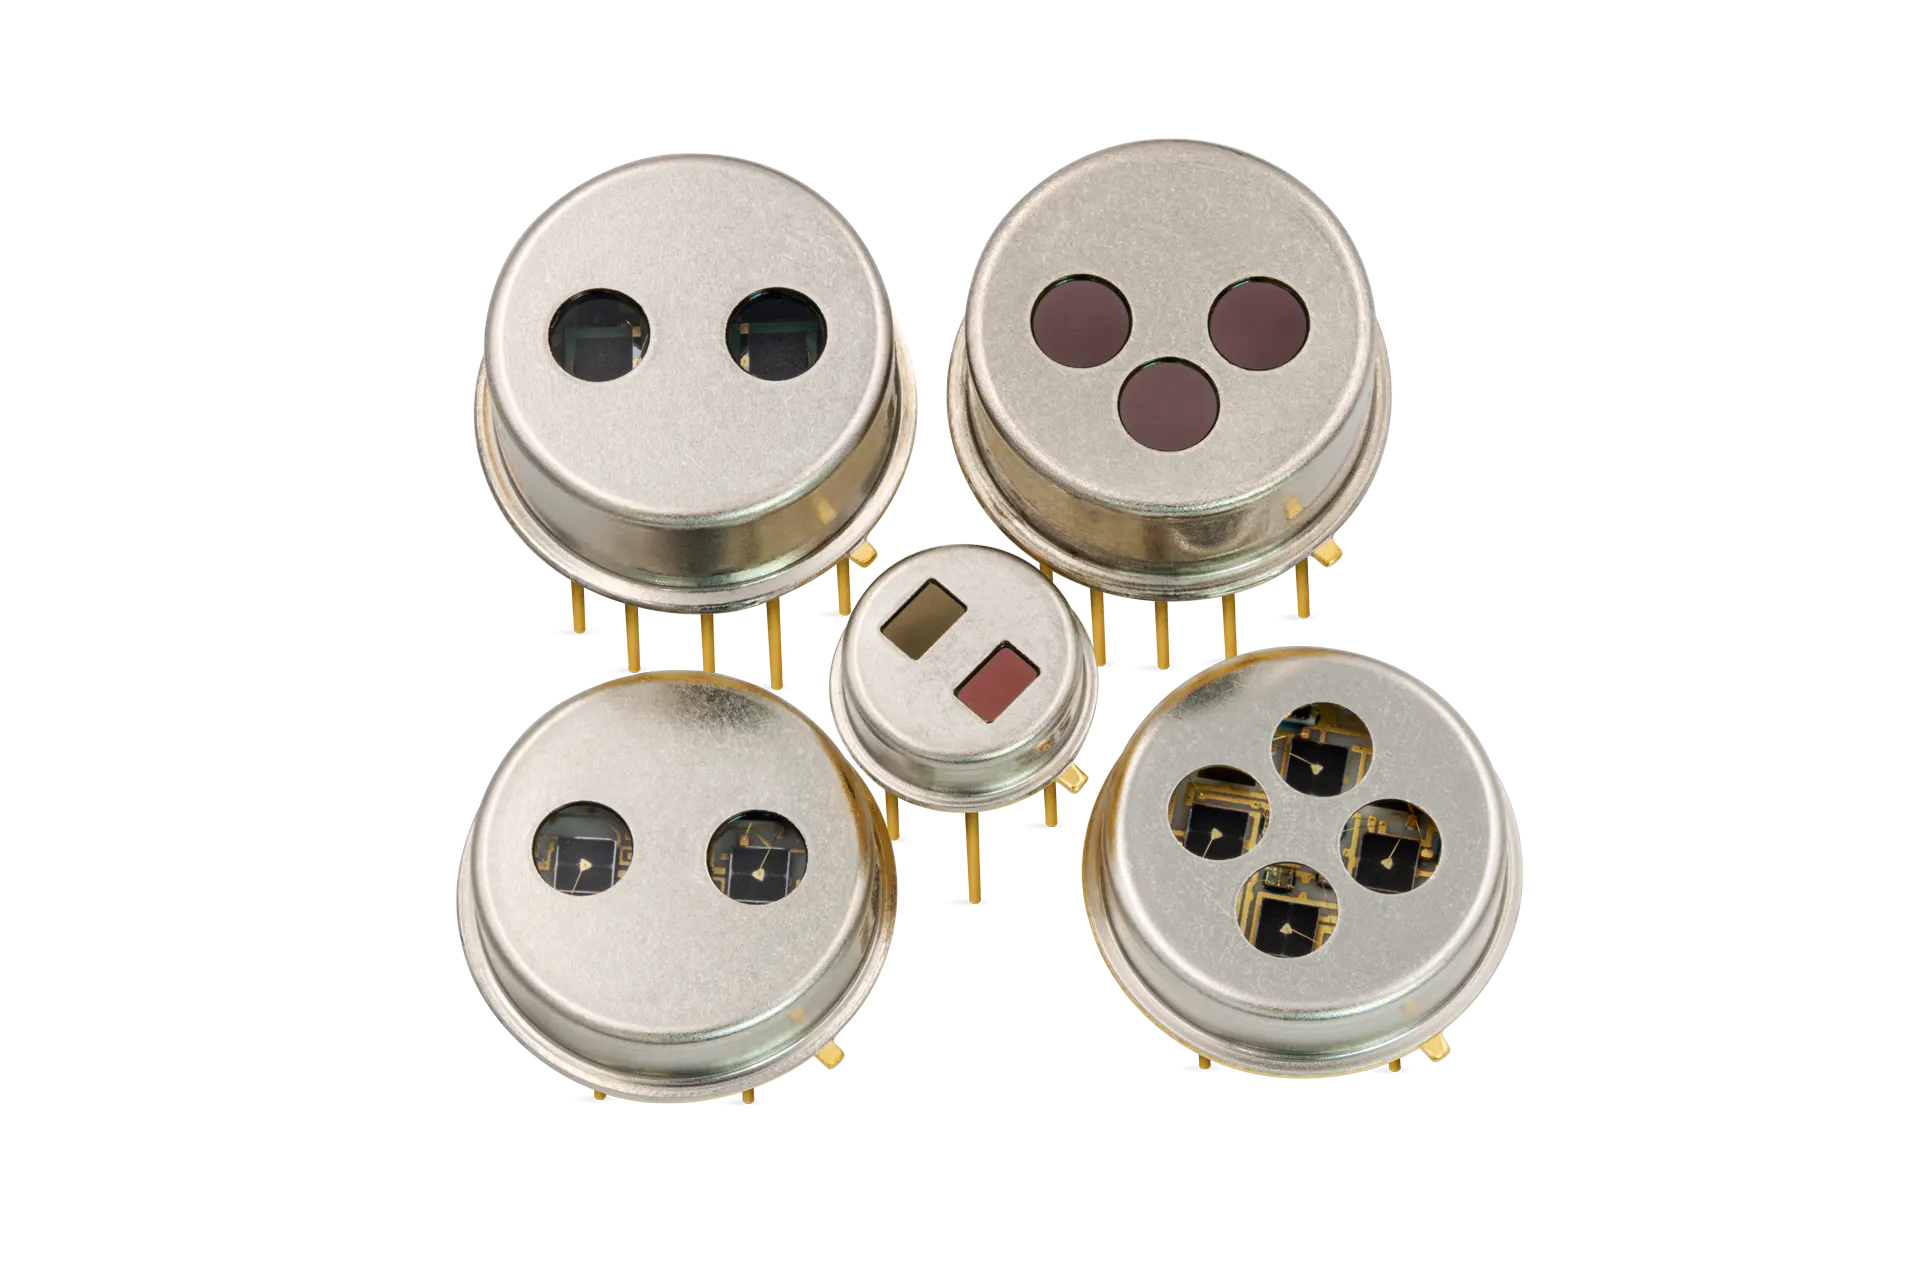 Planar multi channel pyroelectric detectors from InfraTec